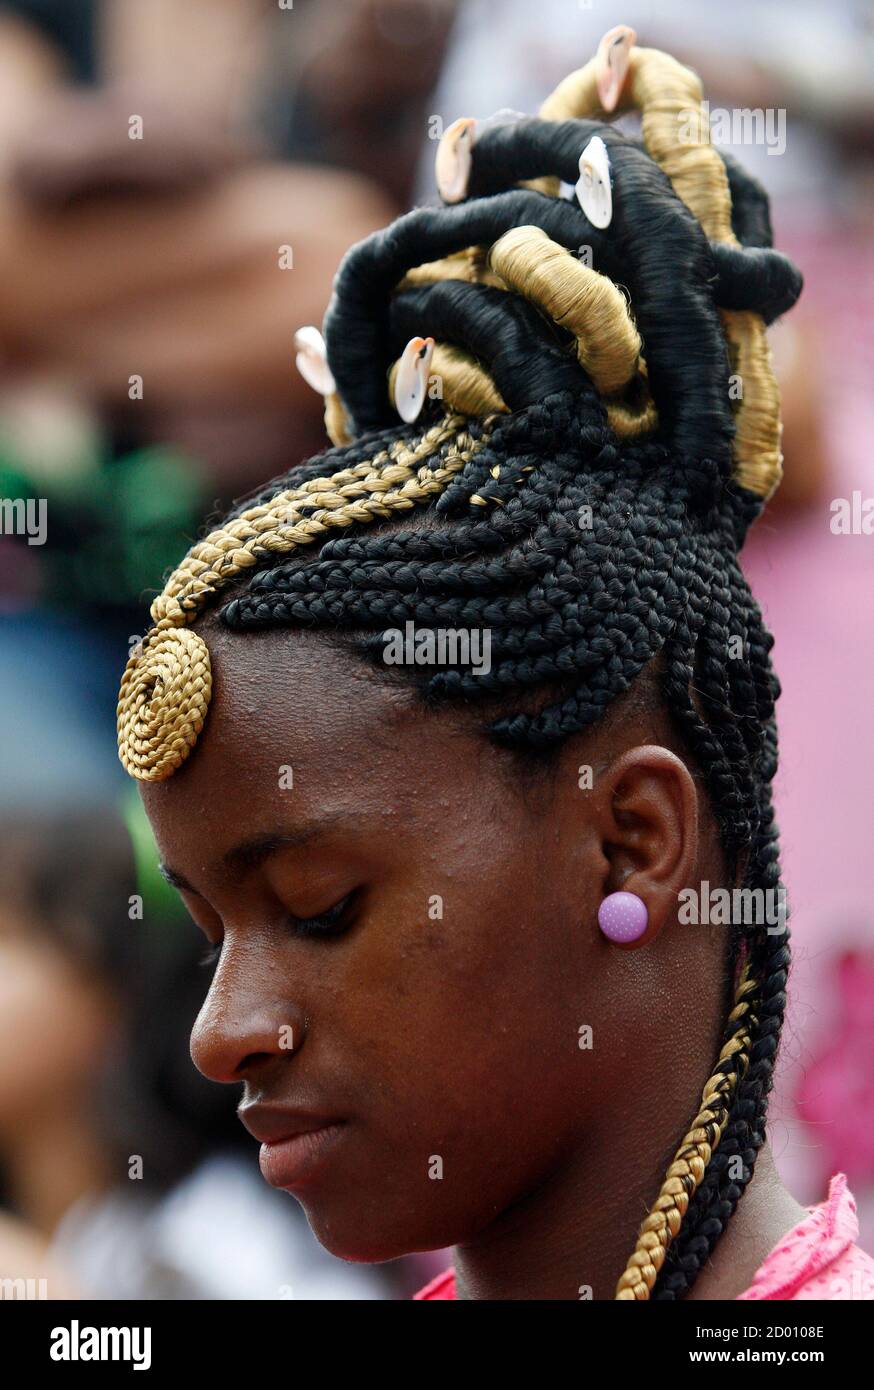 A woman presents an African-Colombian hairstyle during the Afro-Hairstyles  Competition in Cali May 29, 2011. REUTERS/Jaime Saldarriaga (COLOMBIA -  Tags: SOCIETY Stock Photo - Alamy